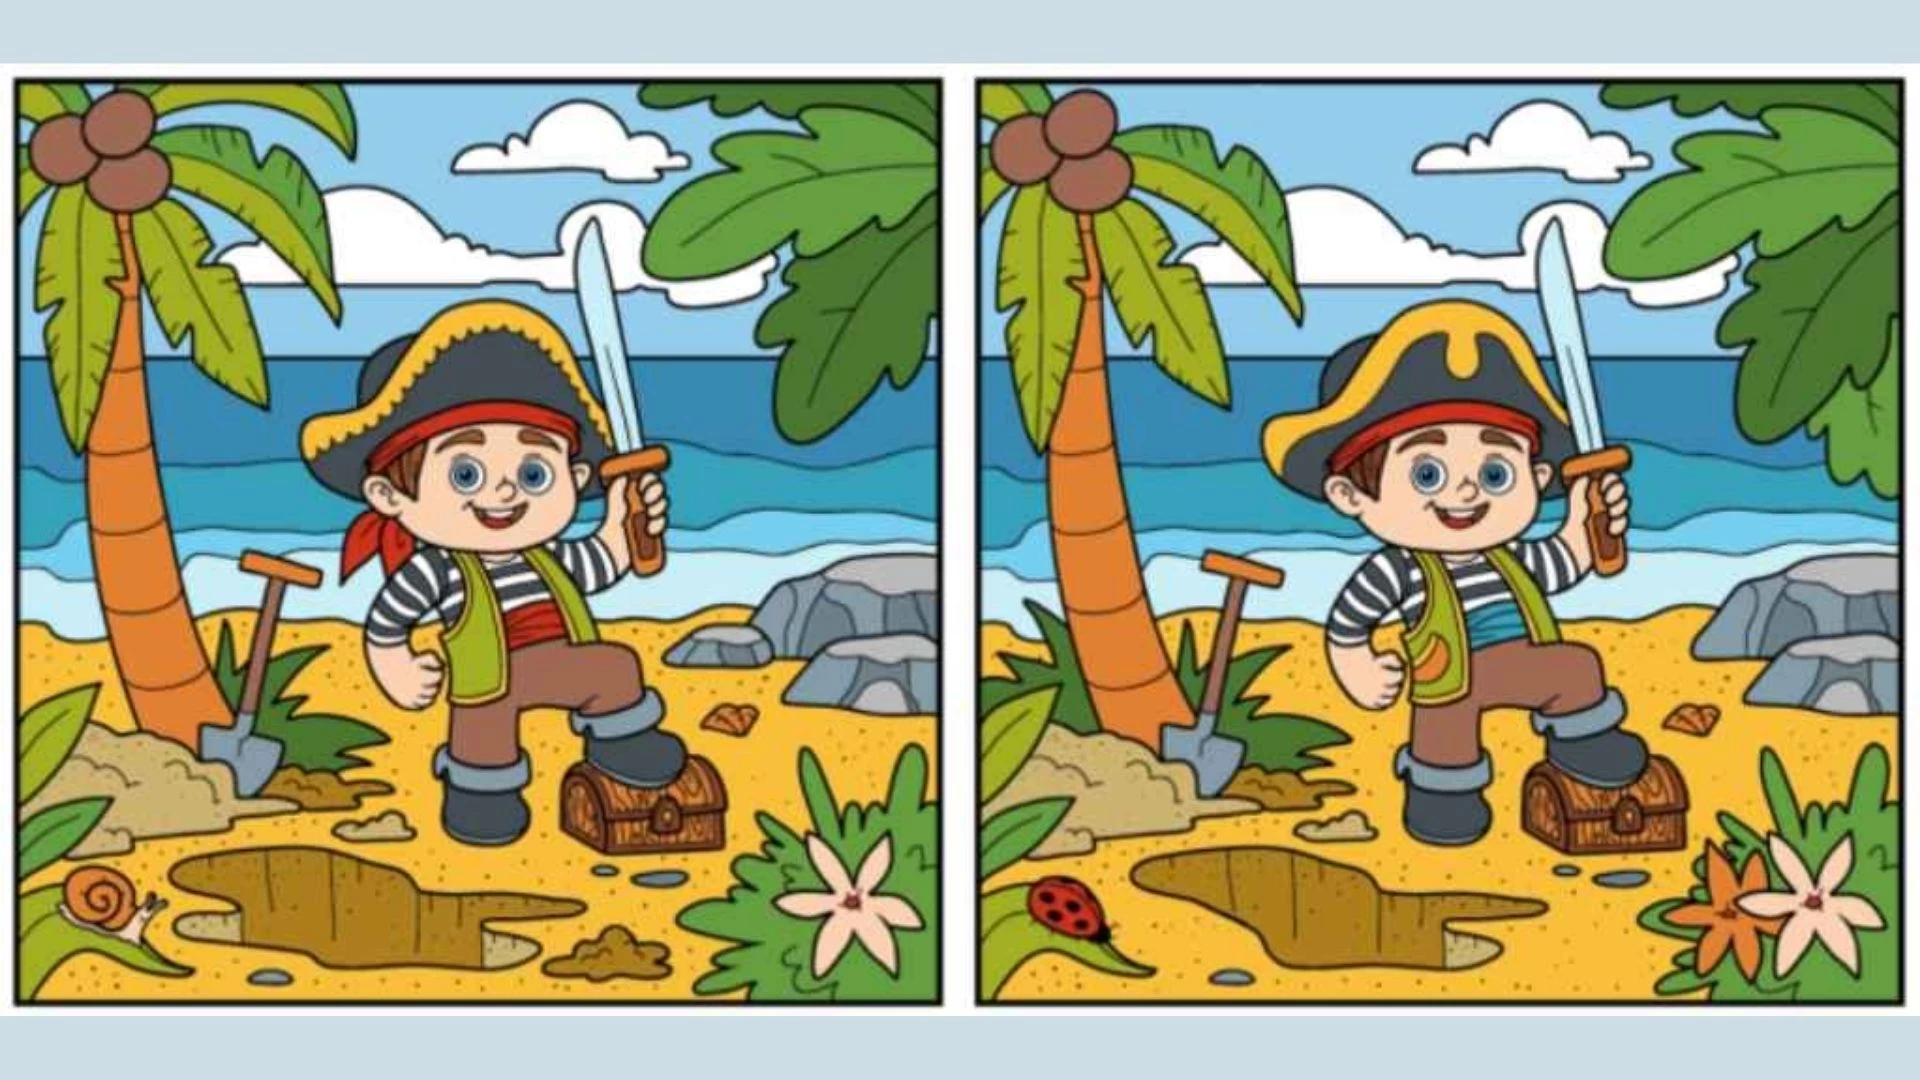 Only Sharp Eyes People can Find the 12 differences between the pirate boy pictures in 35 seconds!